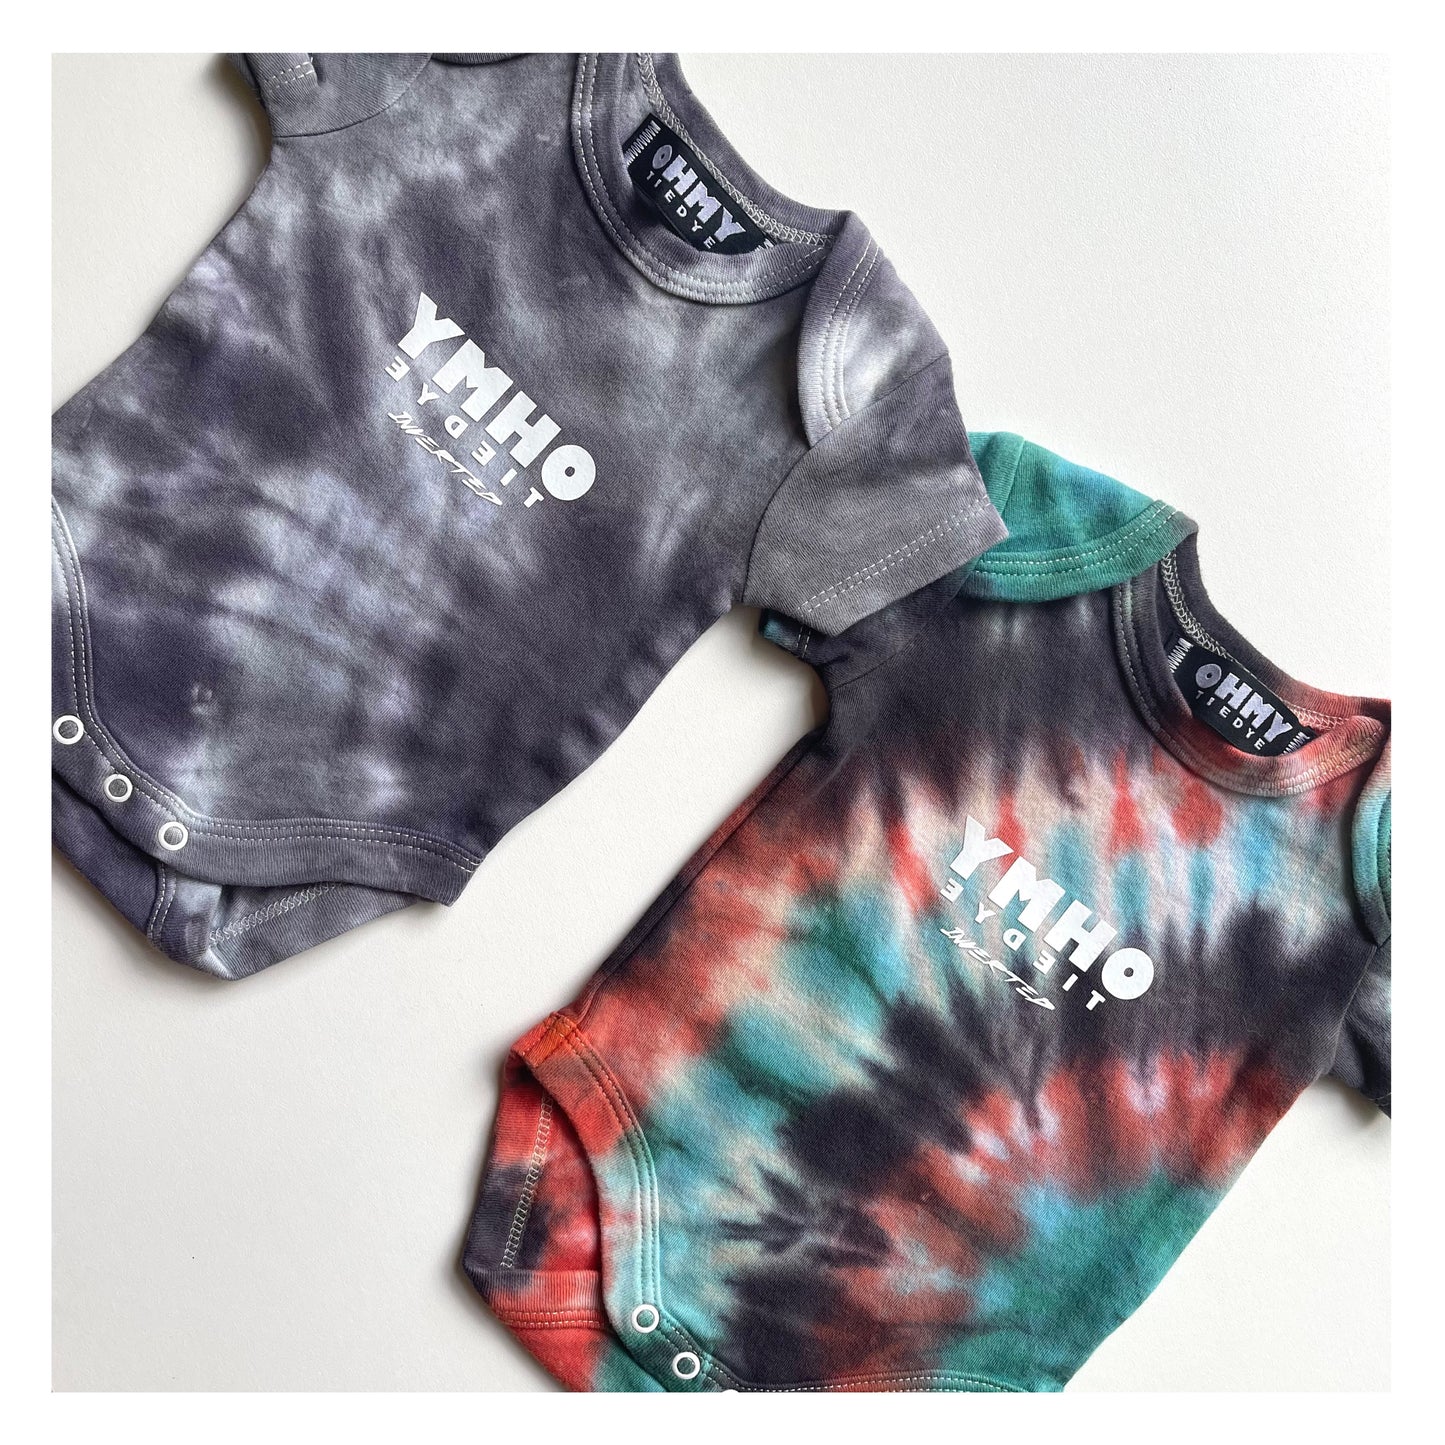 Inverted Series Baby Bodysuits